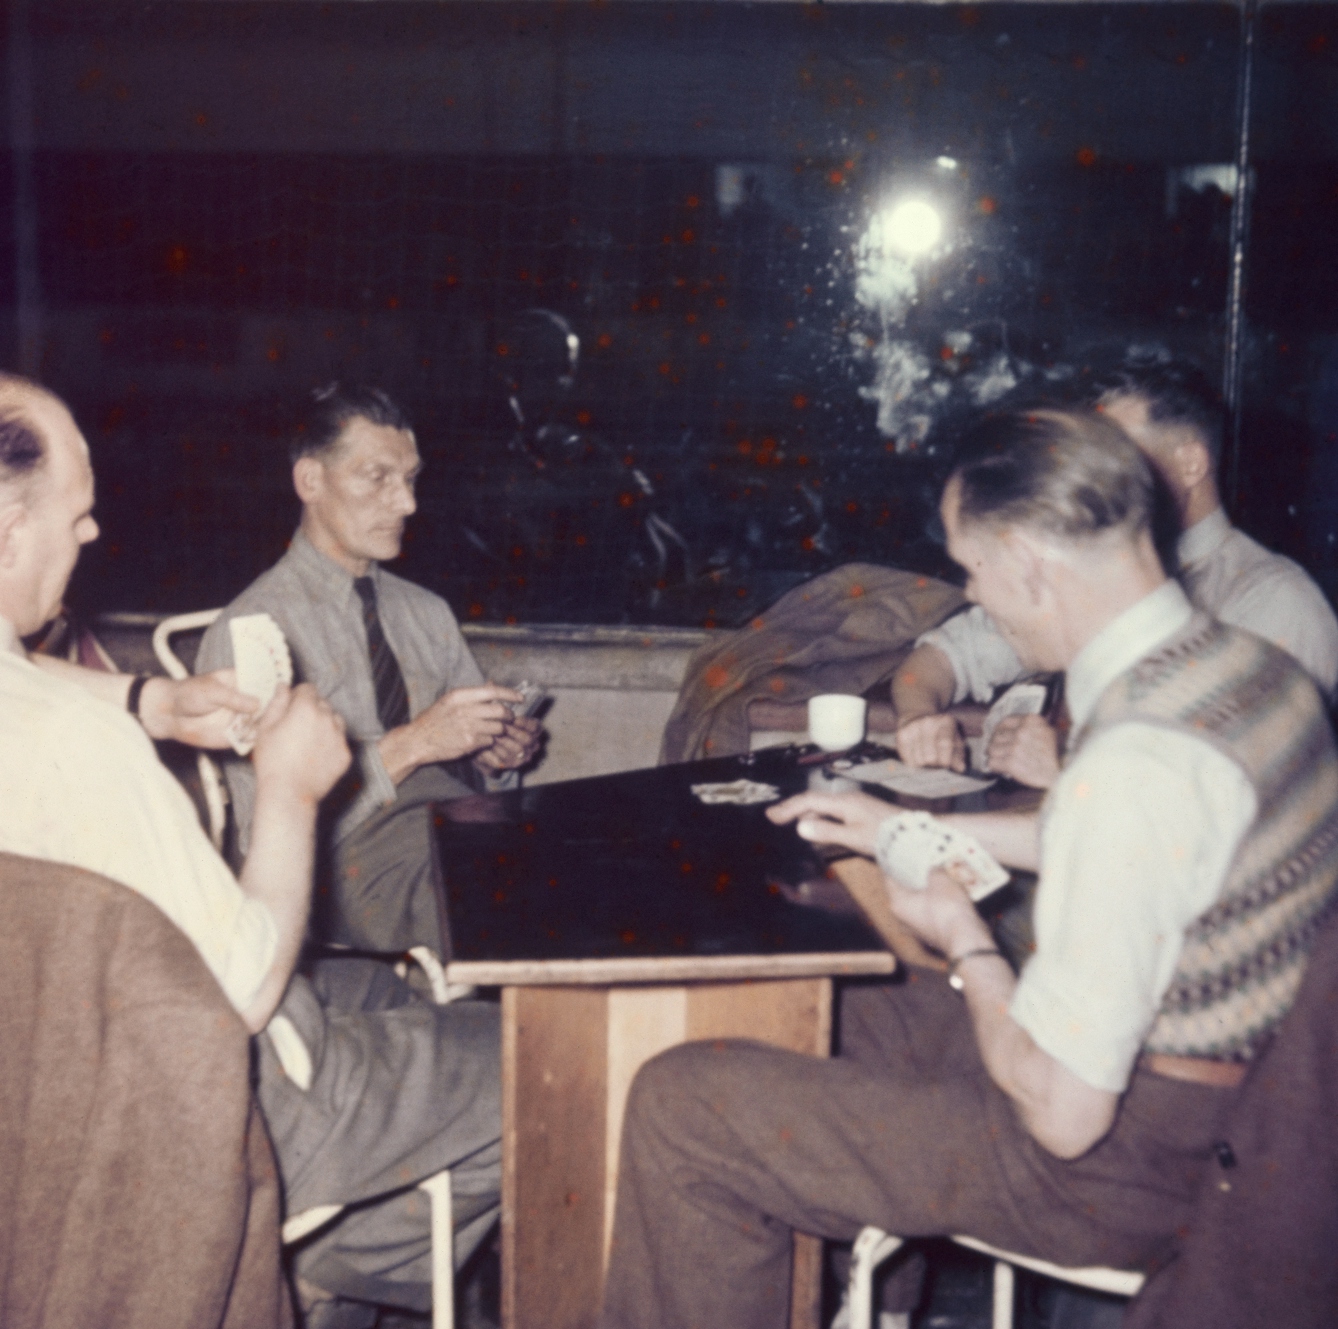 Photograph from the mid-20th Century Peckham Pioneer Centre, showing four men seated at a table with playing cards in their hands. 